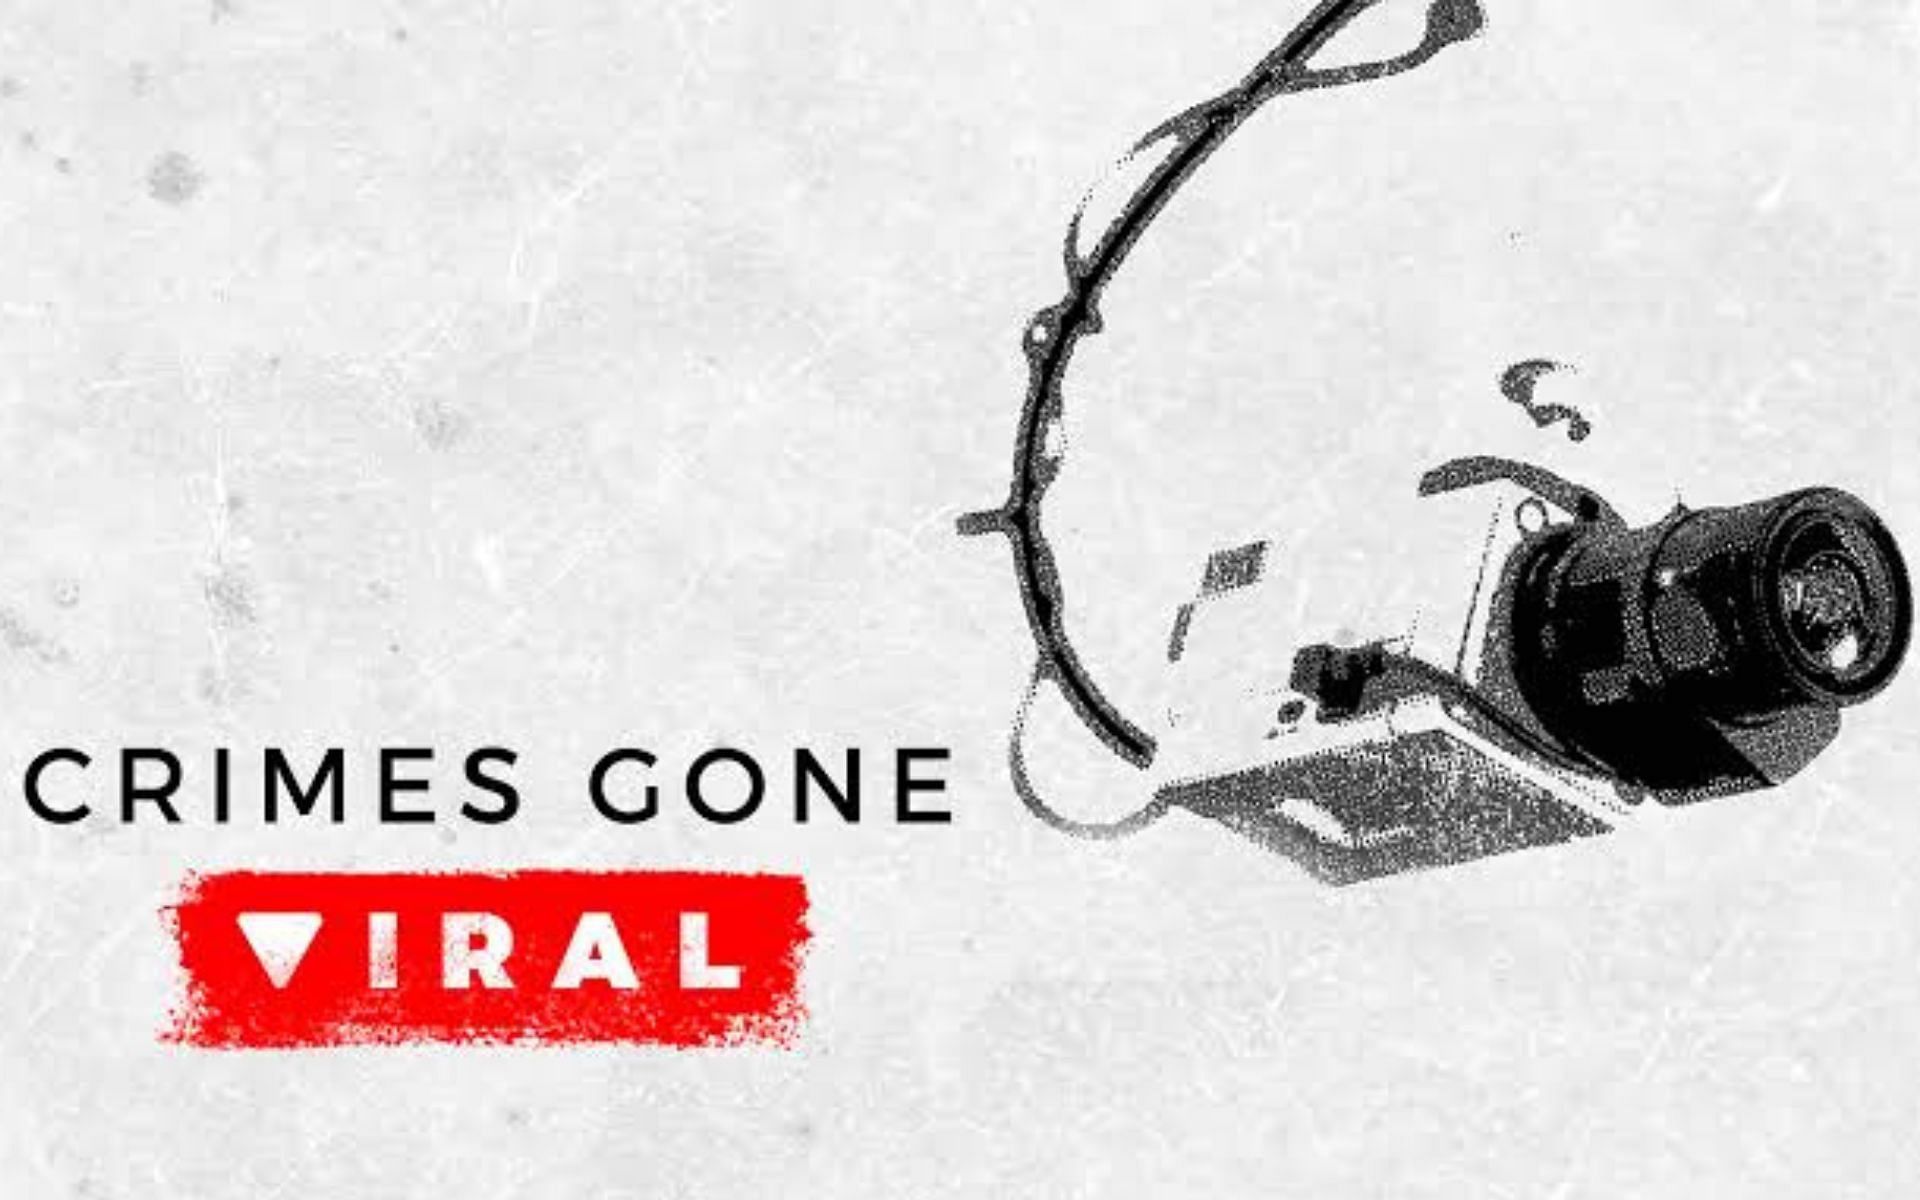 Crimes Gone Viral (Image via Investigation Discovery/YouTube)